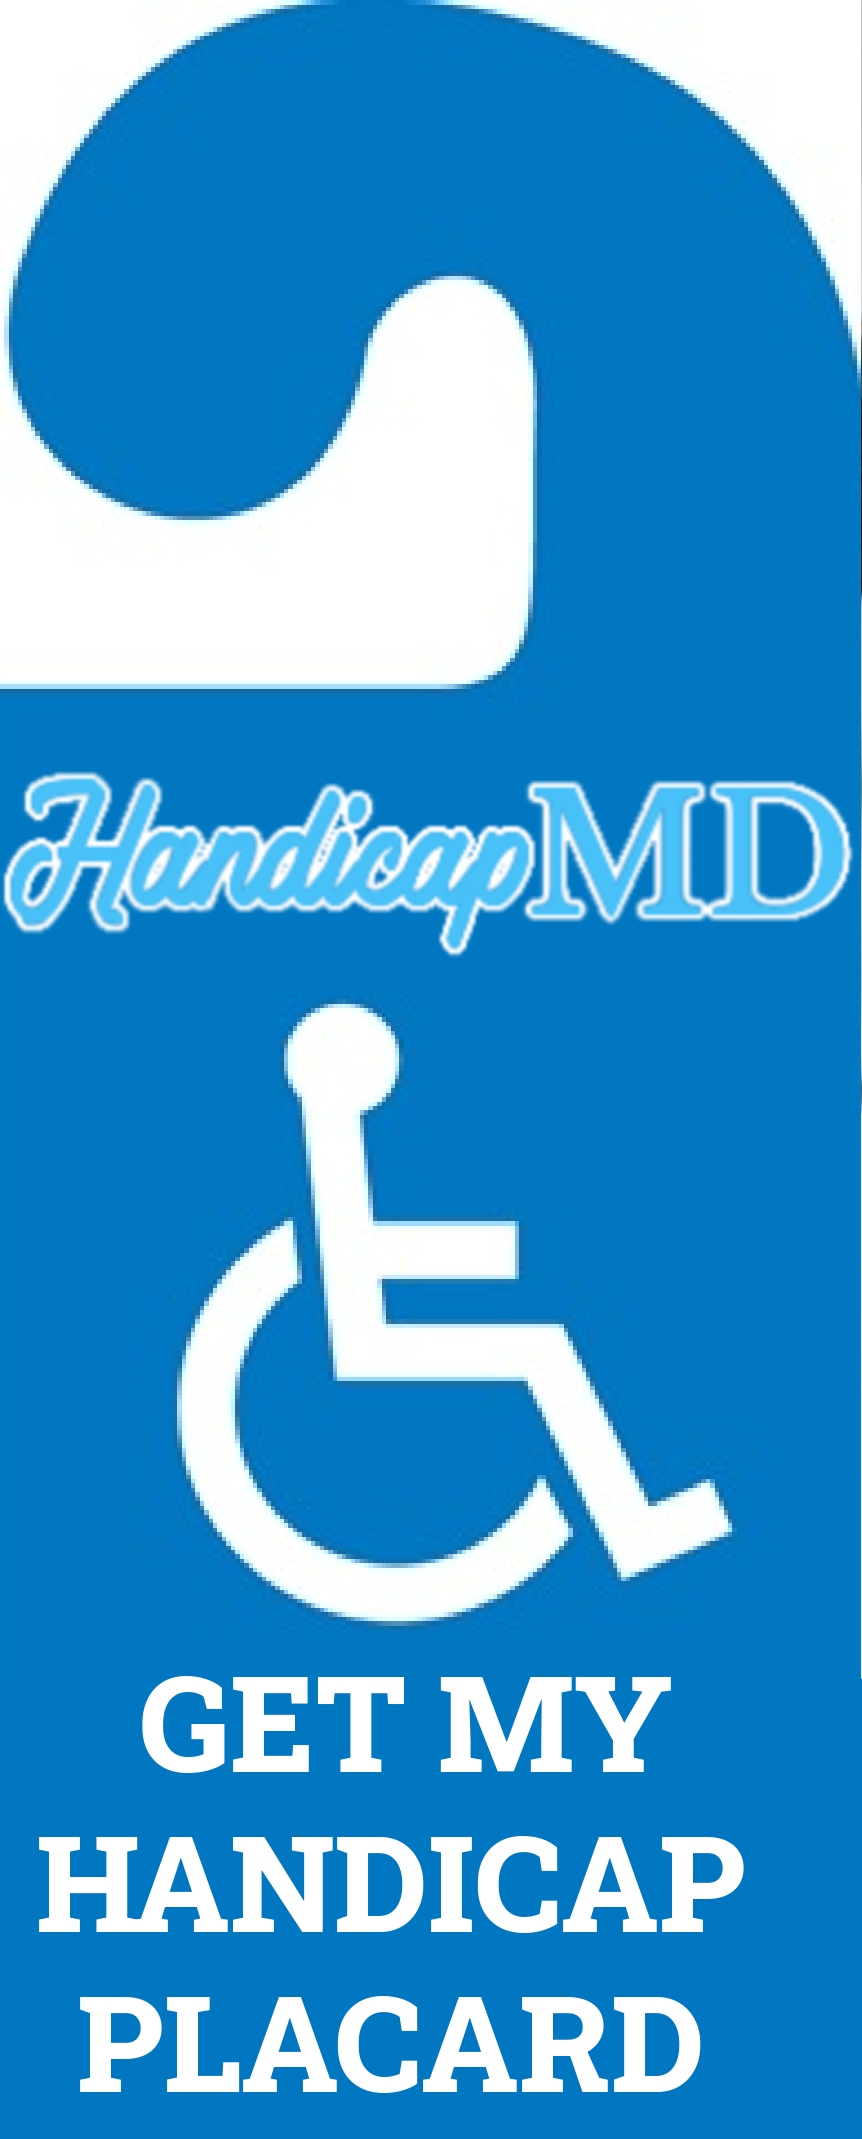 How to Replace a Lost or Stolen Handicap Placard in Fort Collins CO